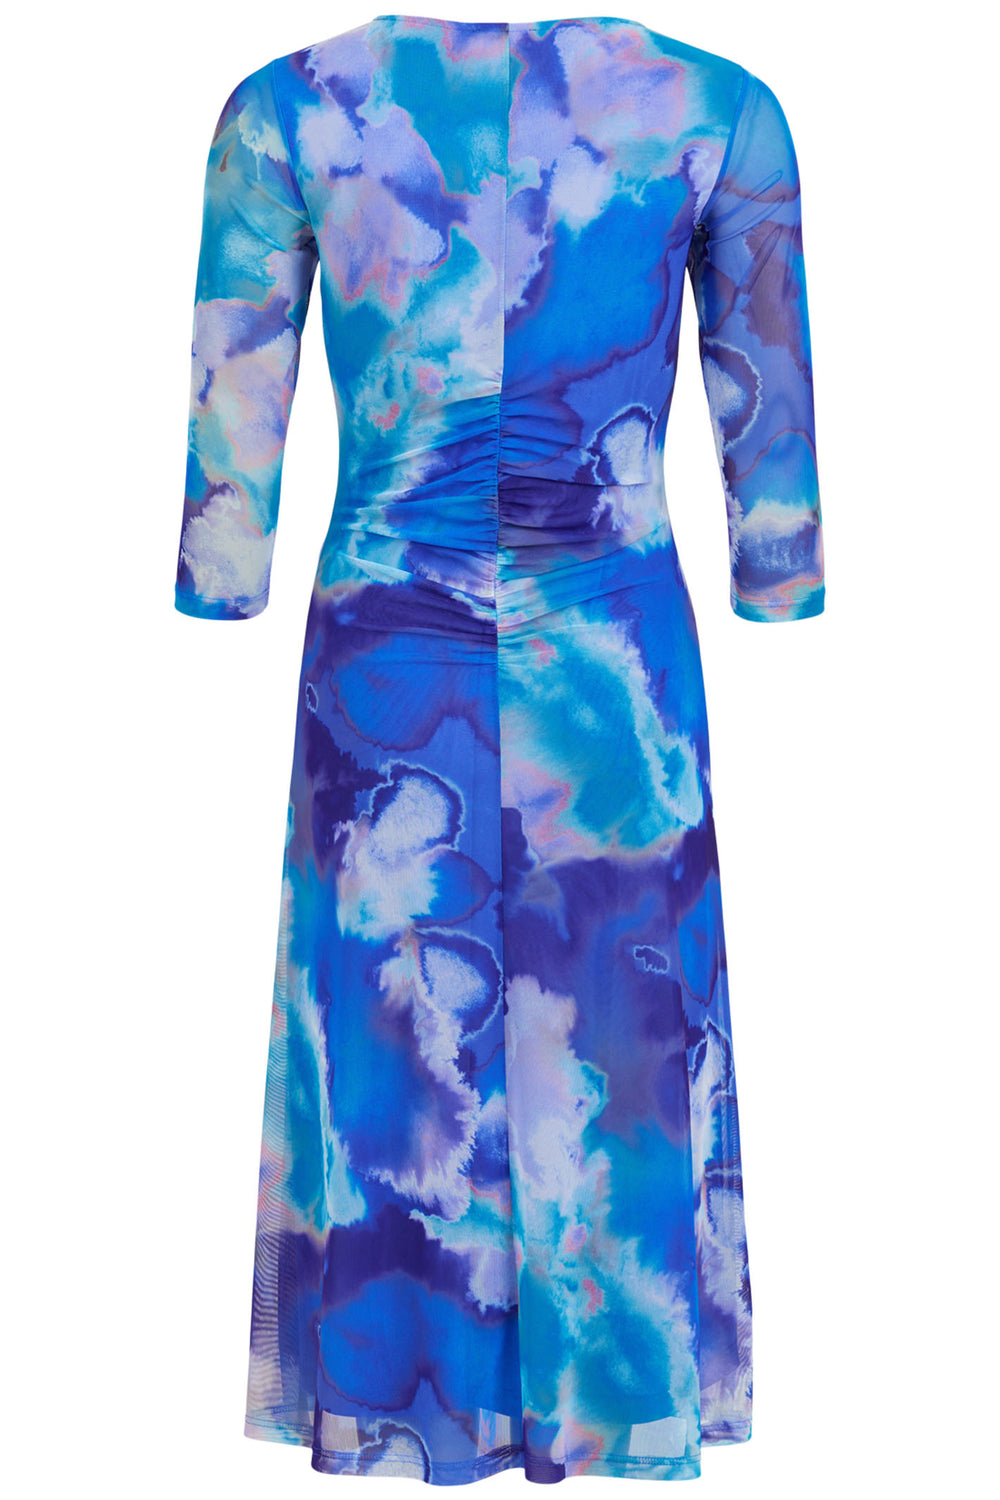 Tia London 78810 65 Blue Abstract Print V-Neck Dress - Experience Boutique